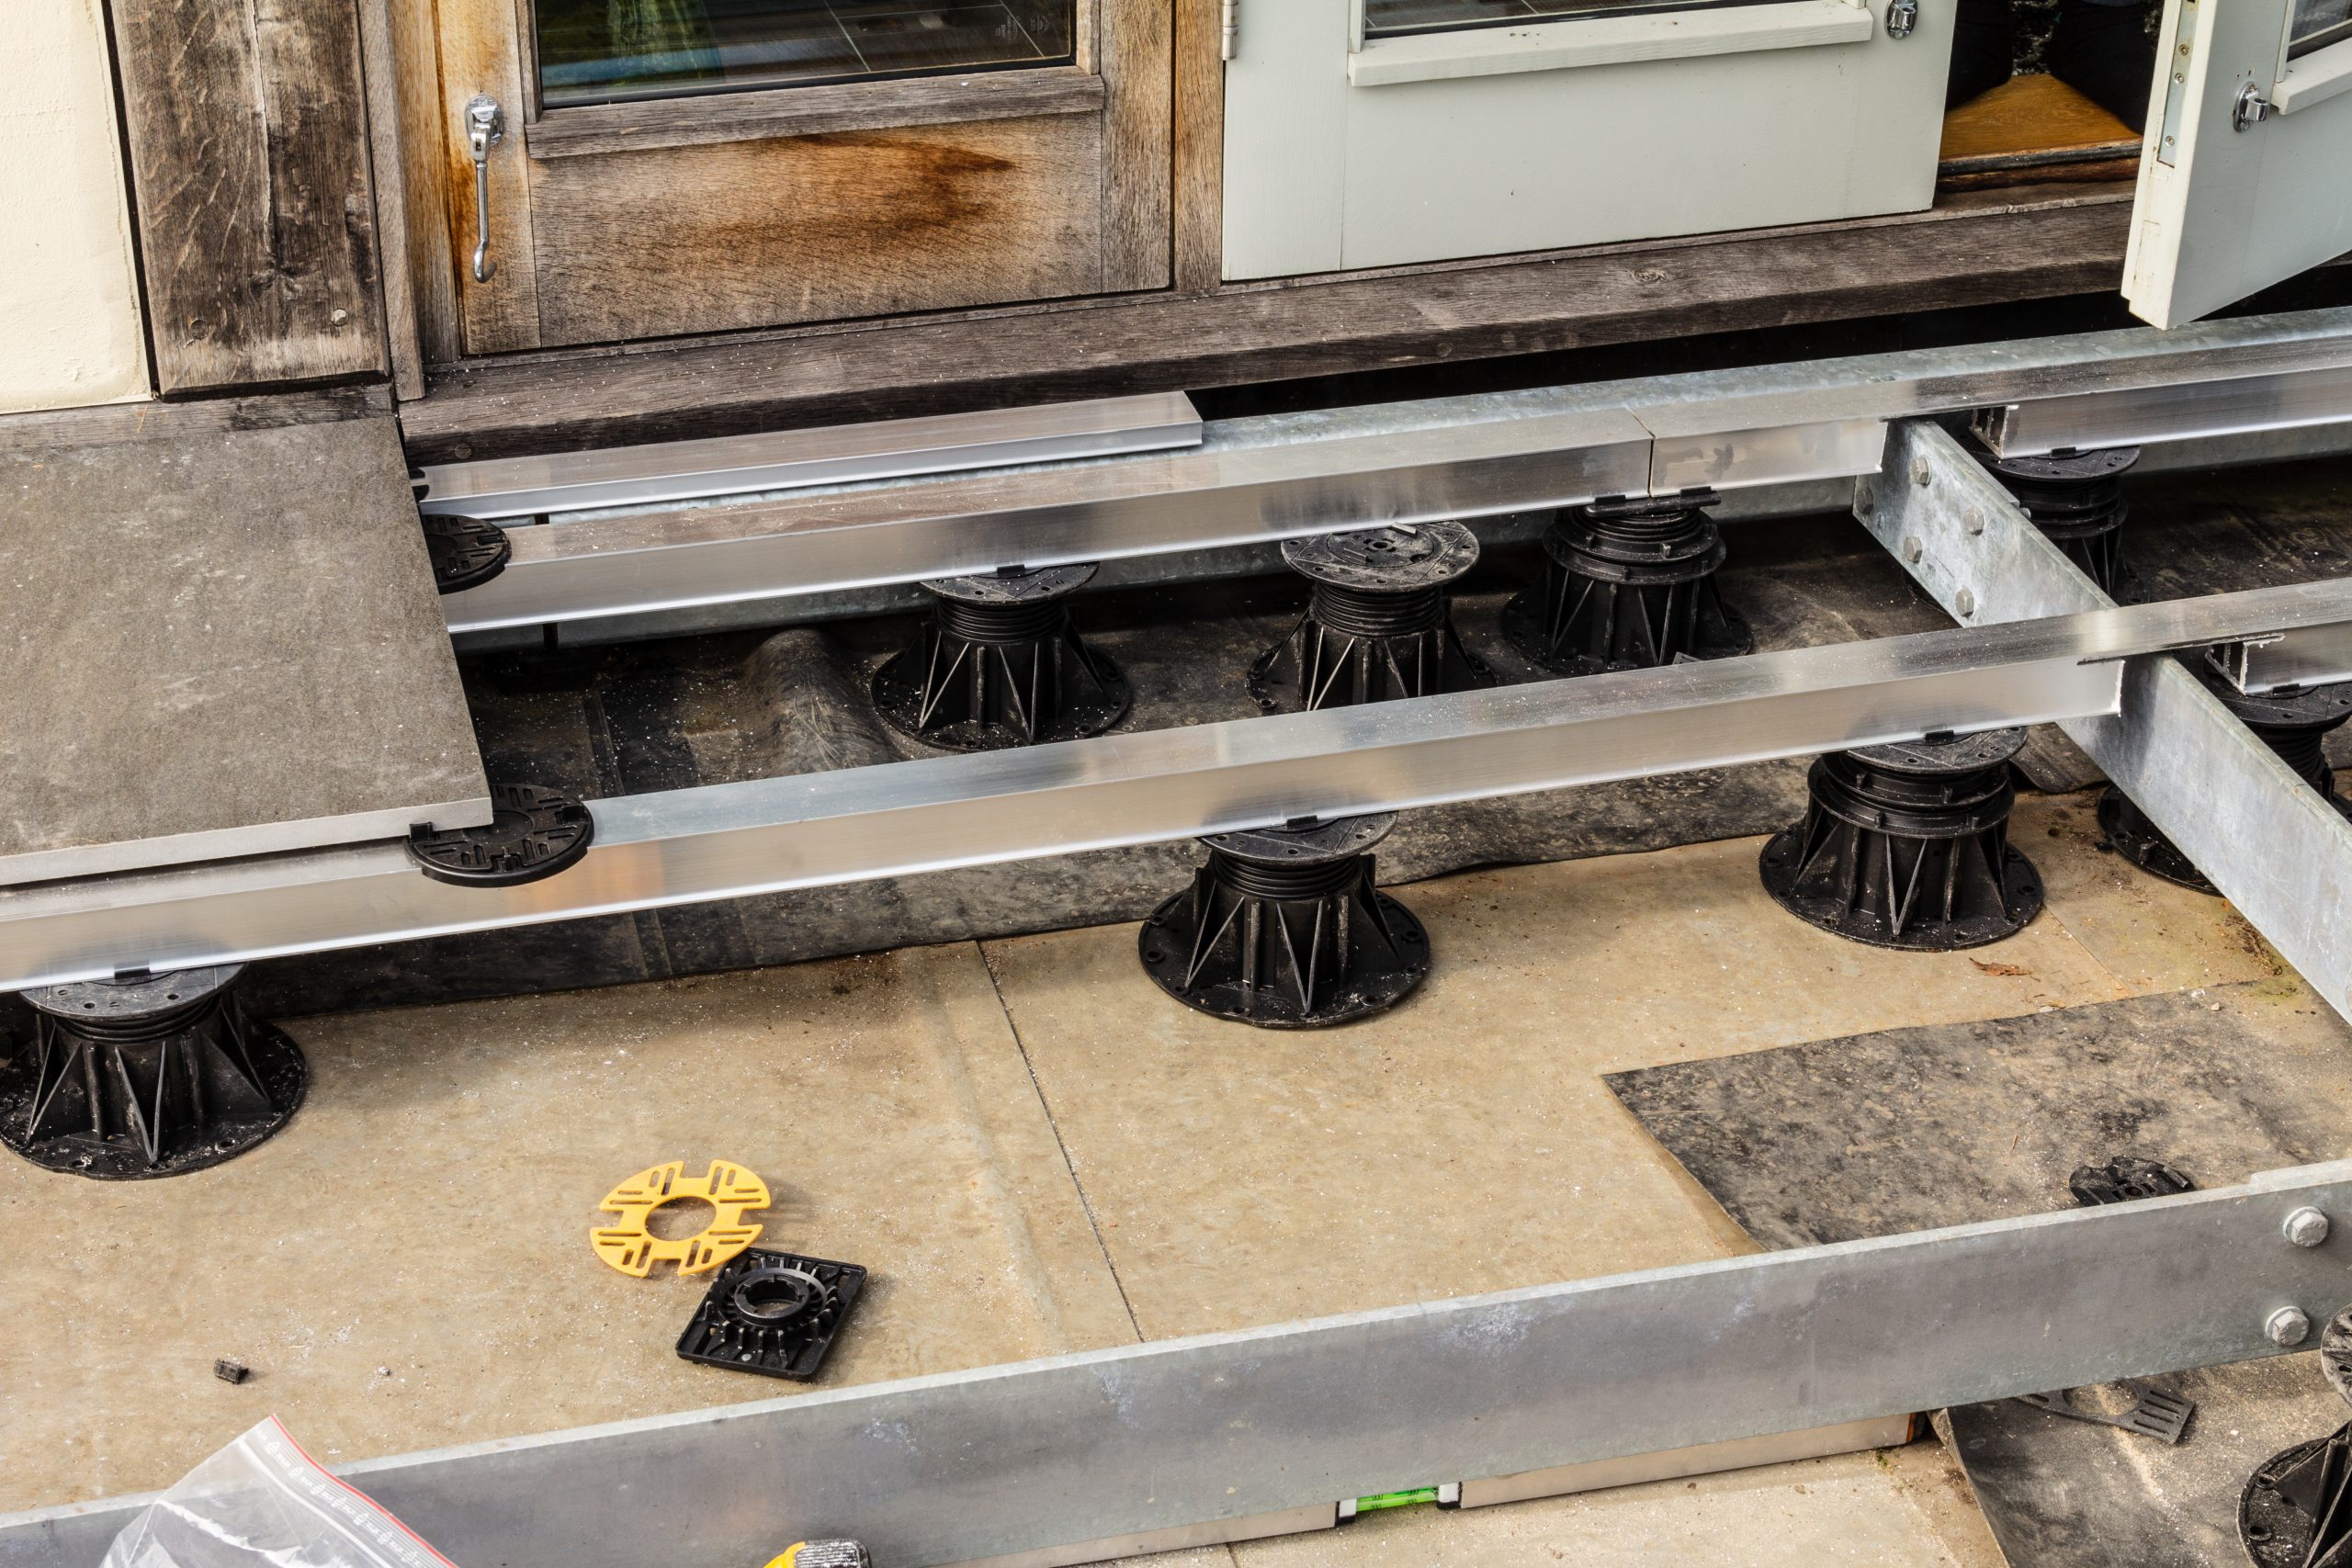 Pedestal rail system for decking and paving